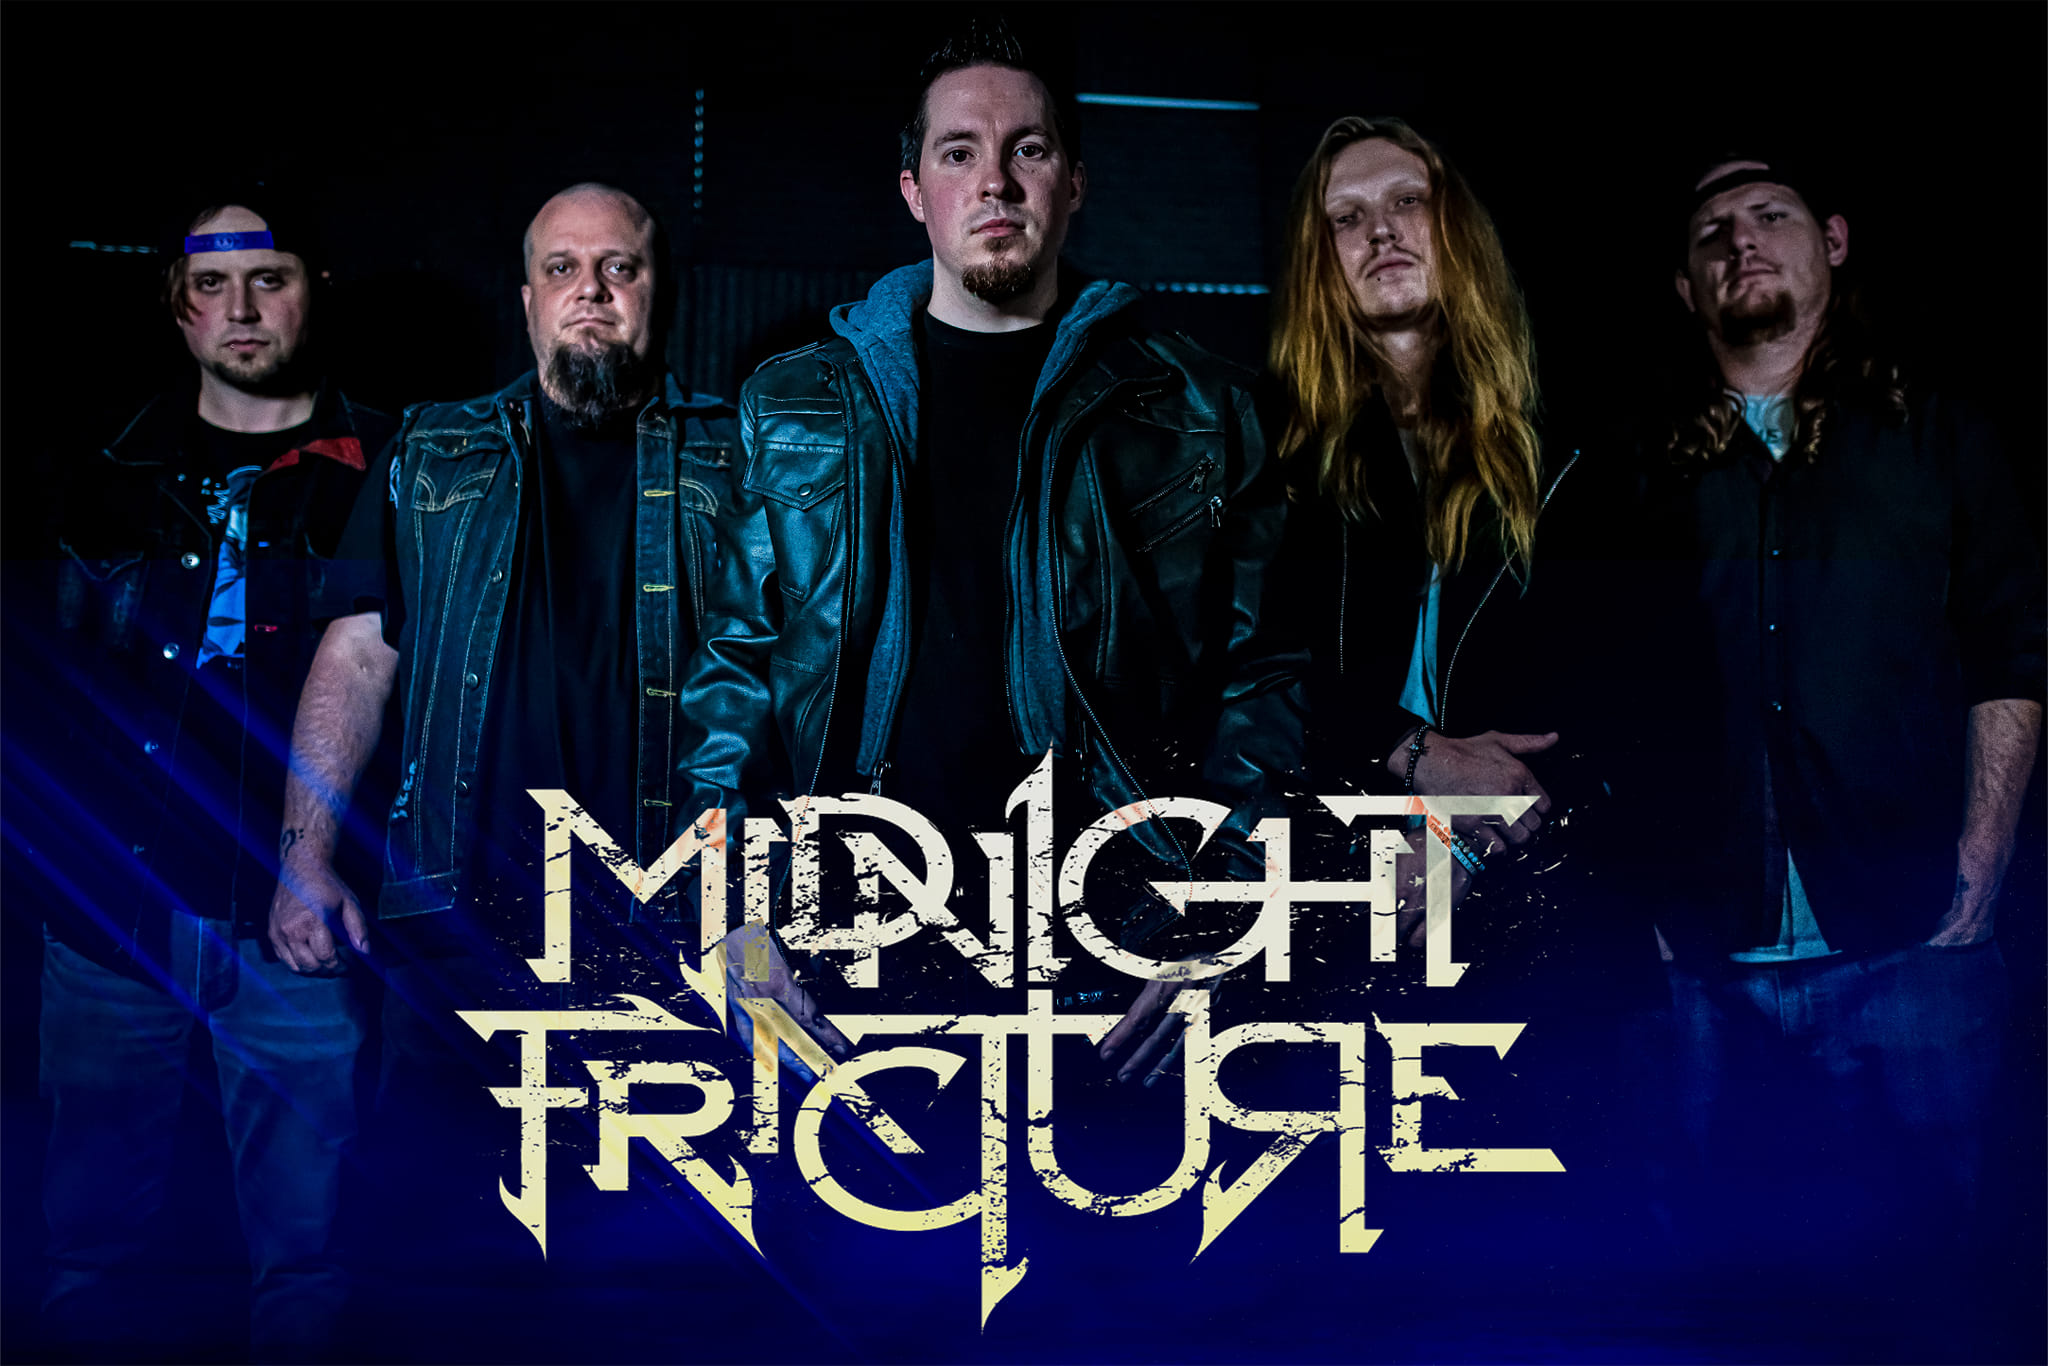 MIDNIGHT FRACTURE picture